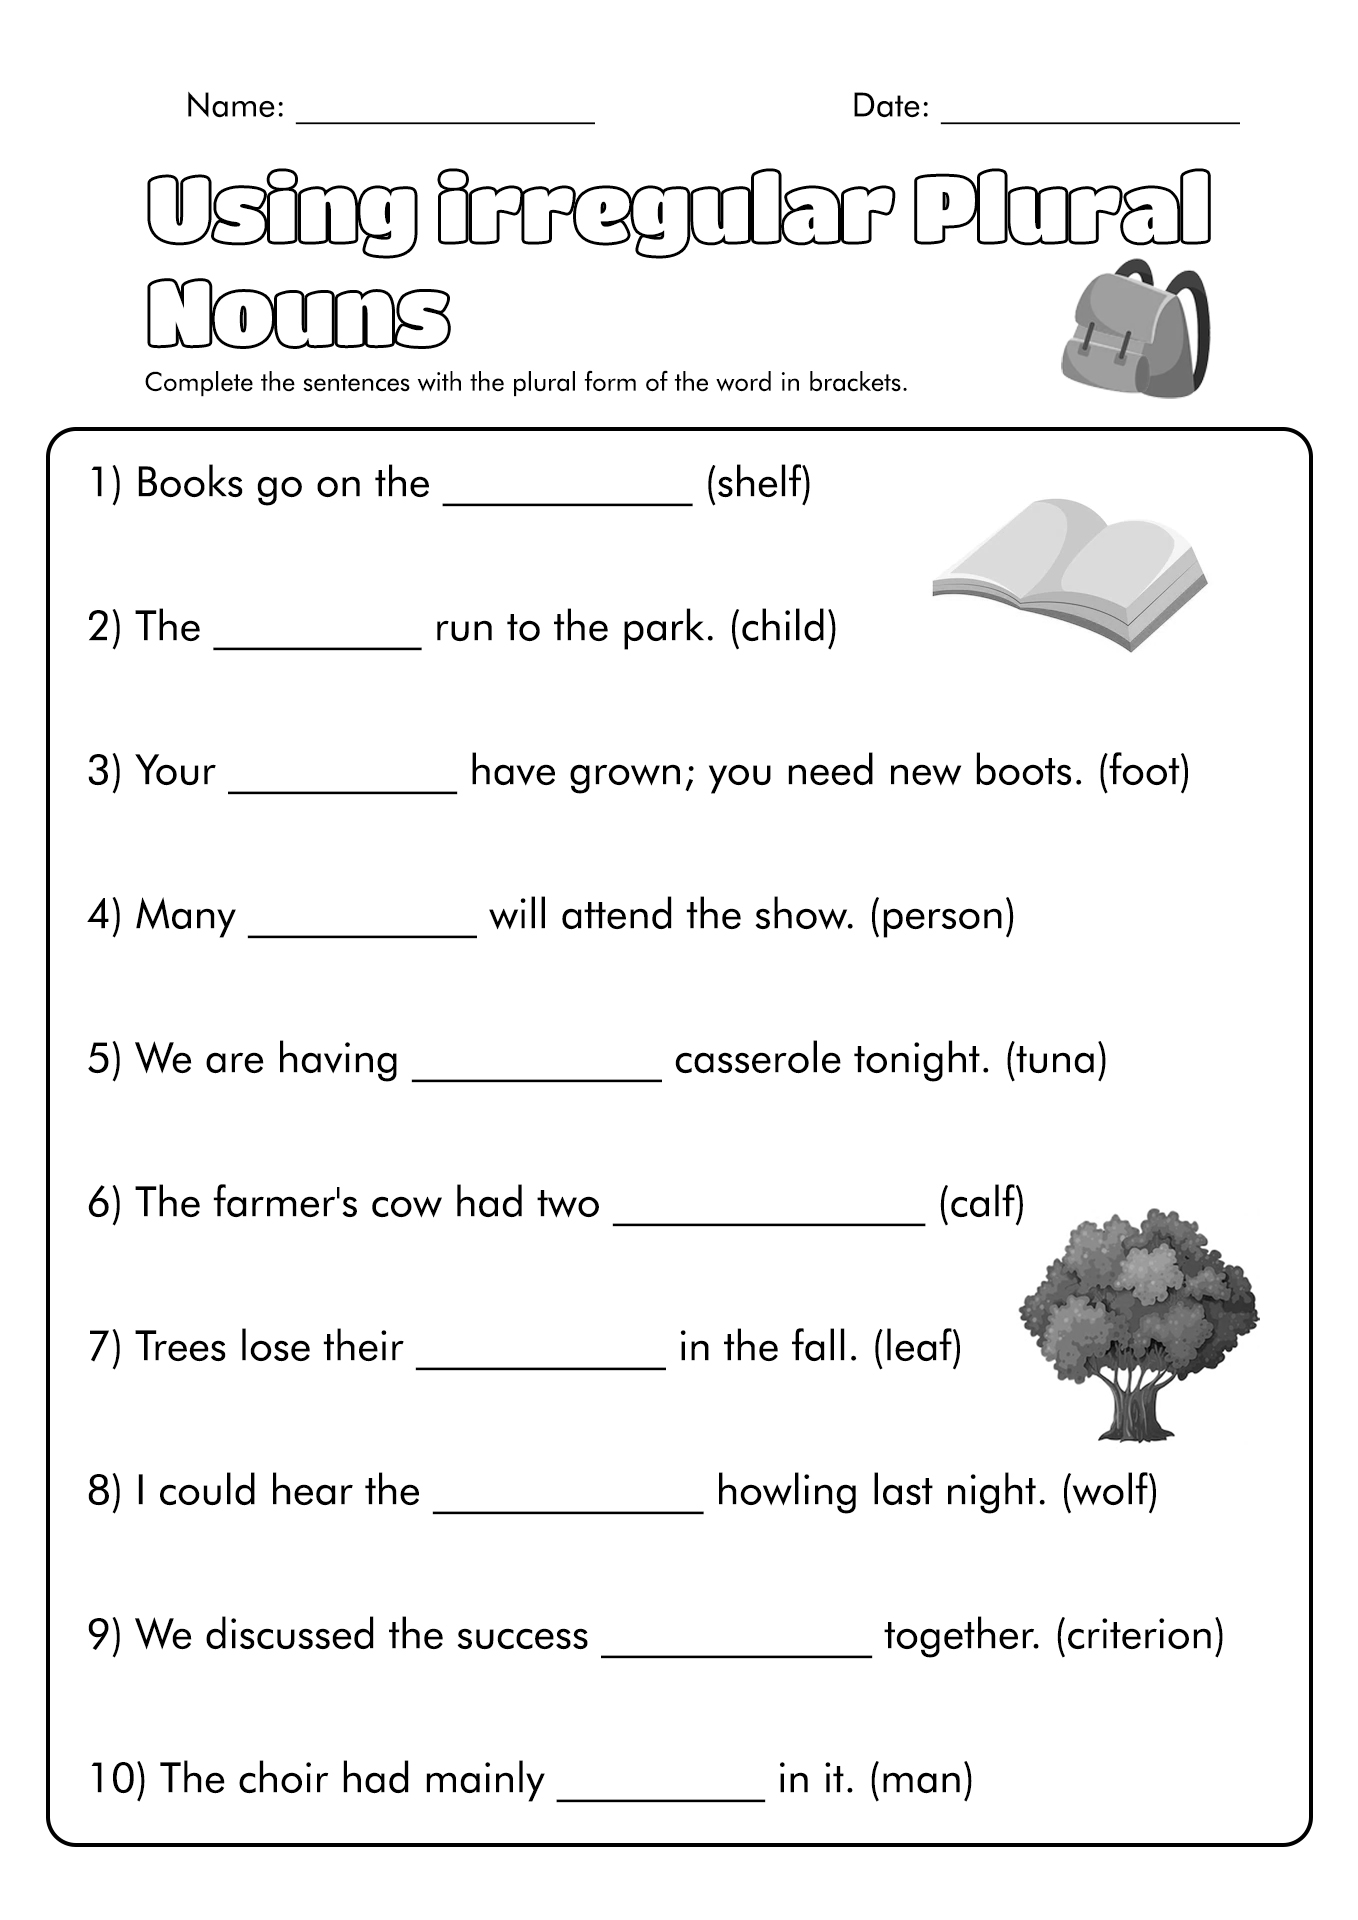 list-of-36-important-irregular-plural-nouns-in-english-esl-forums